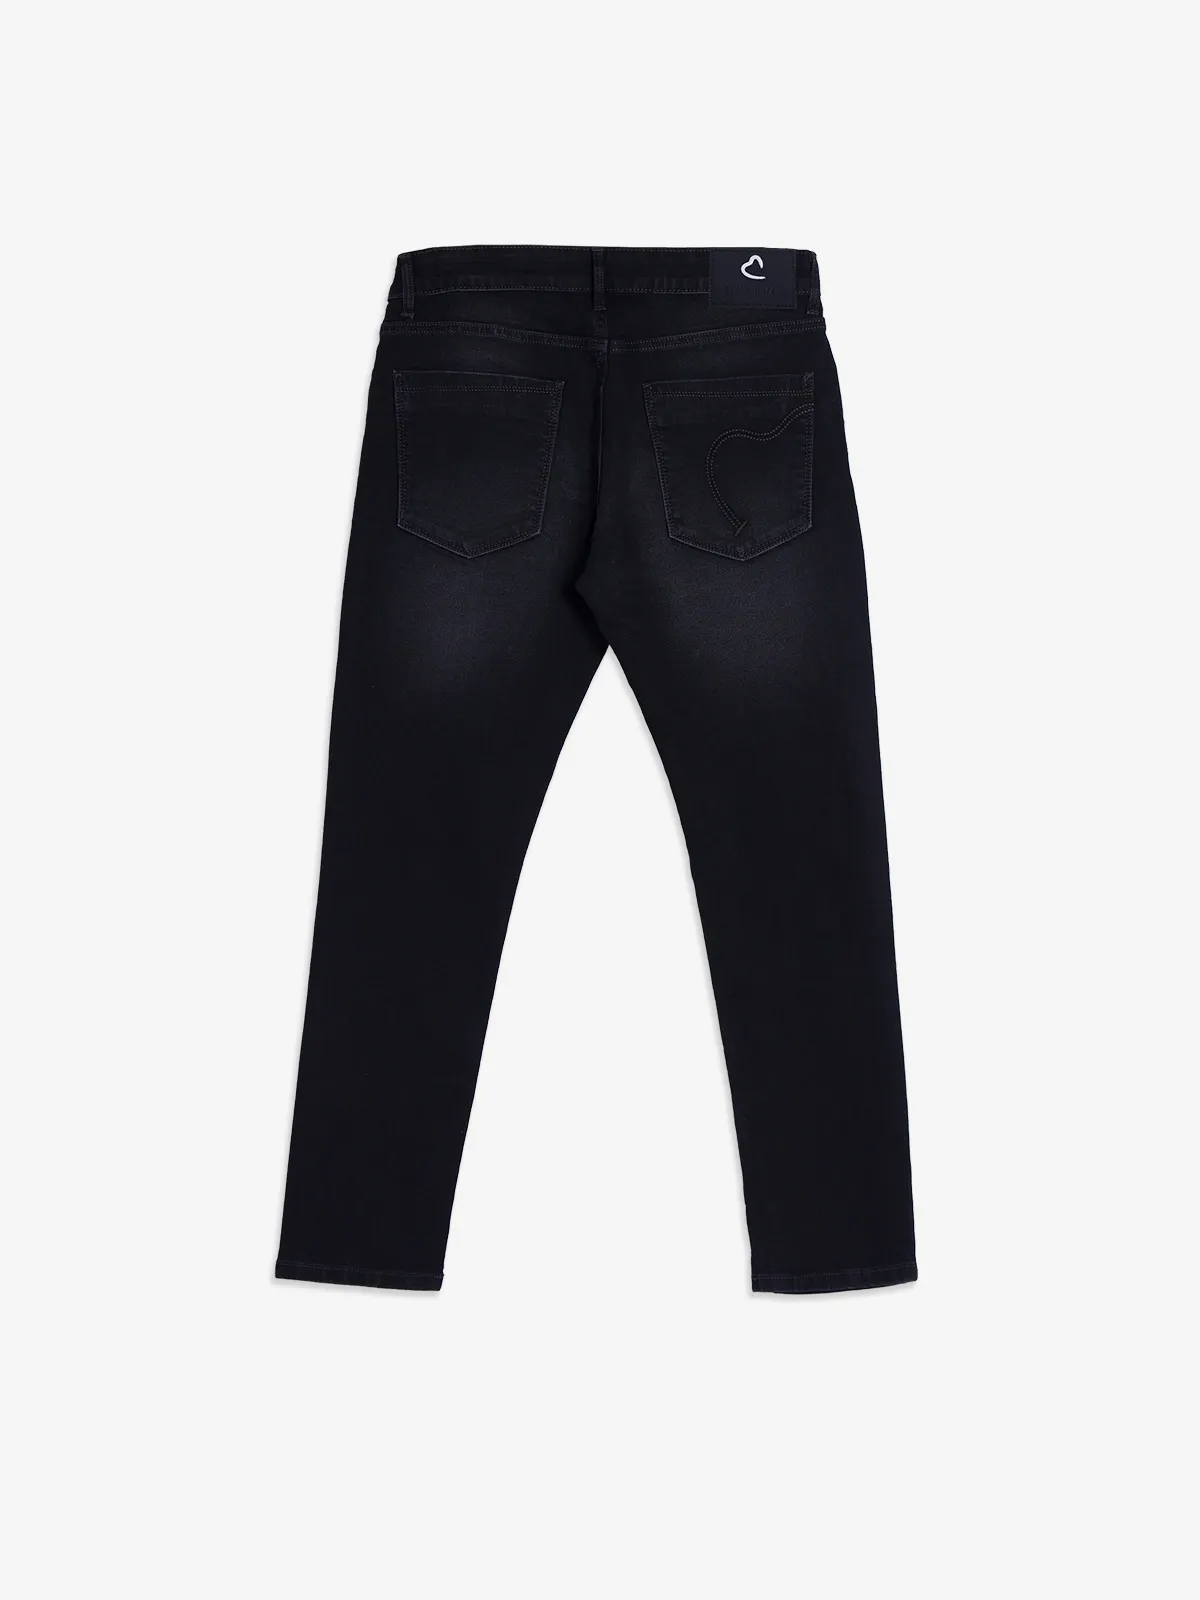 BEING HUMAN black cropped fit jeans